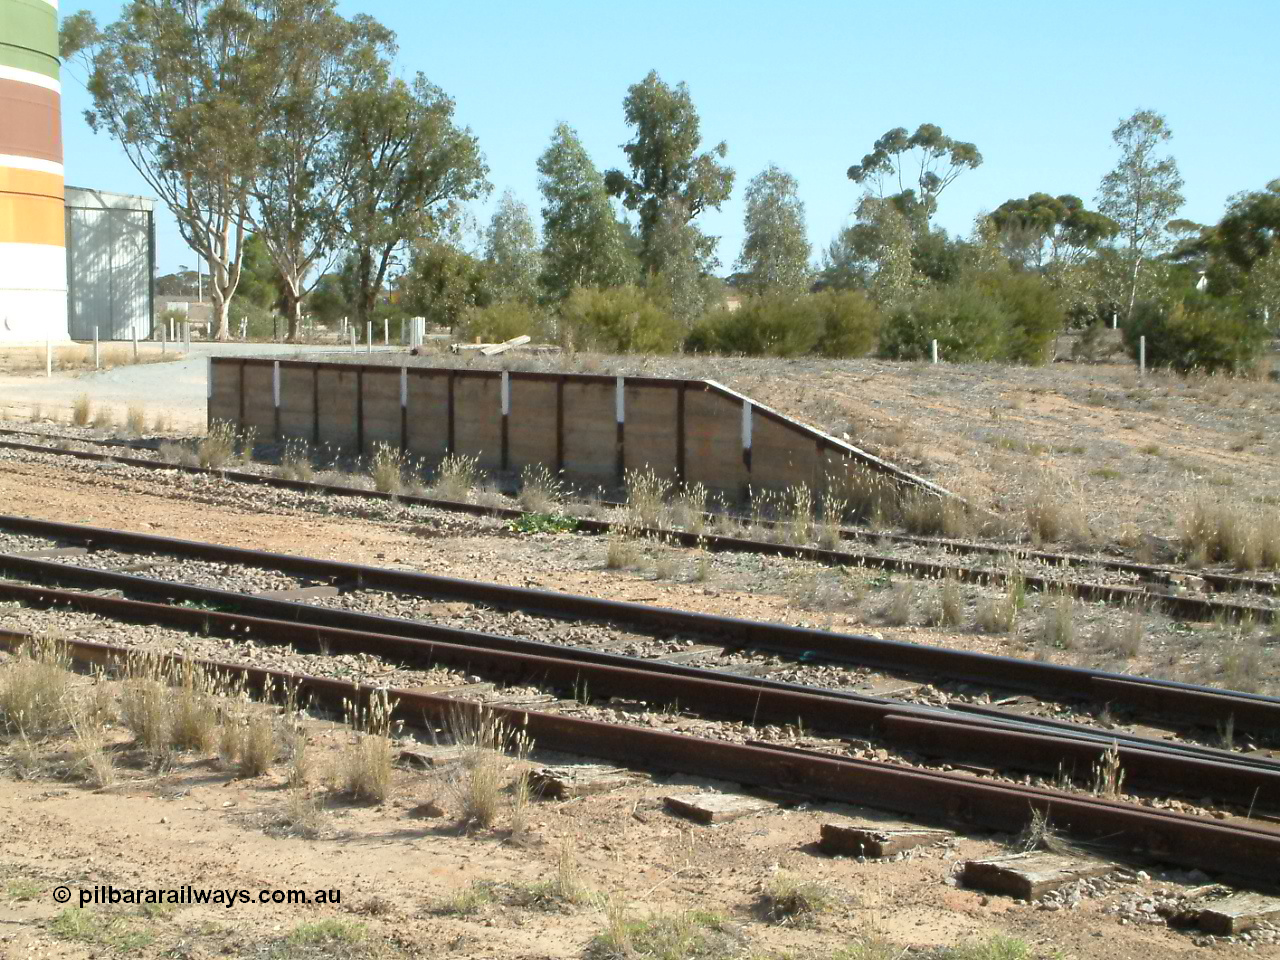 030405 145612
Warramboo, track view across to loading ramp located at the northern end of the sidings, 5th April 2003.
